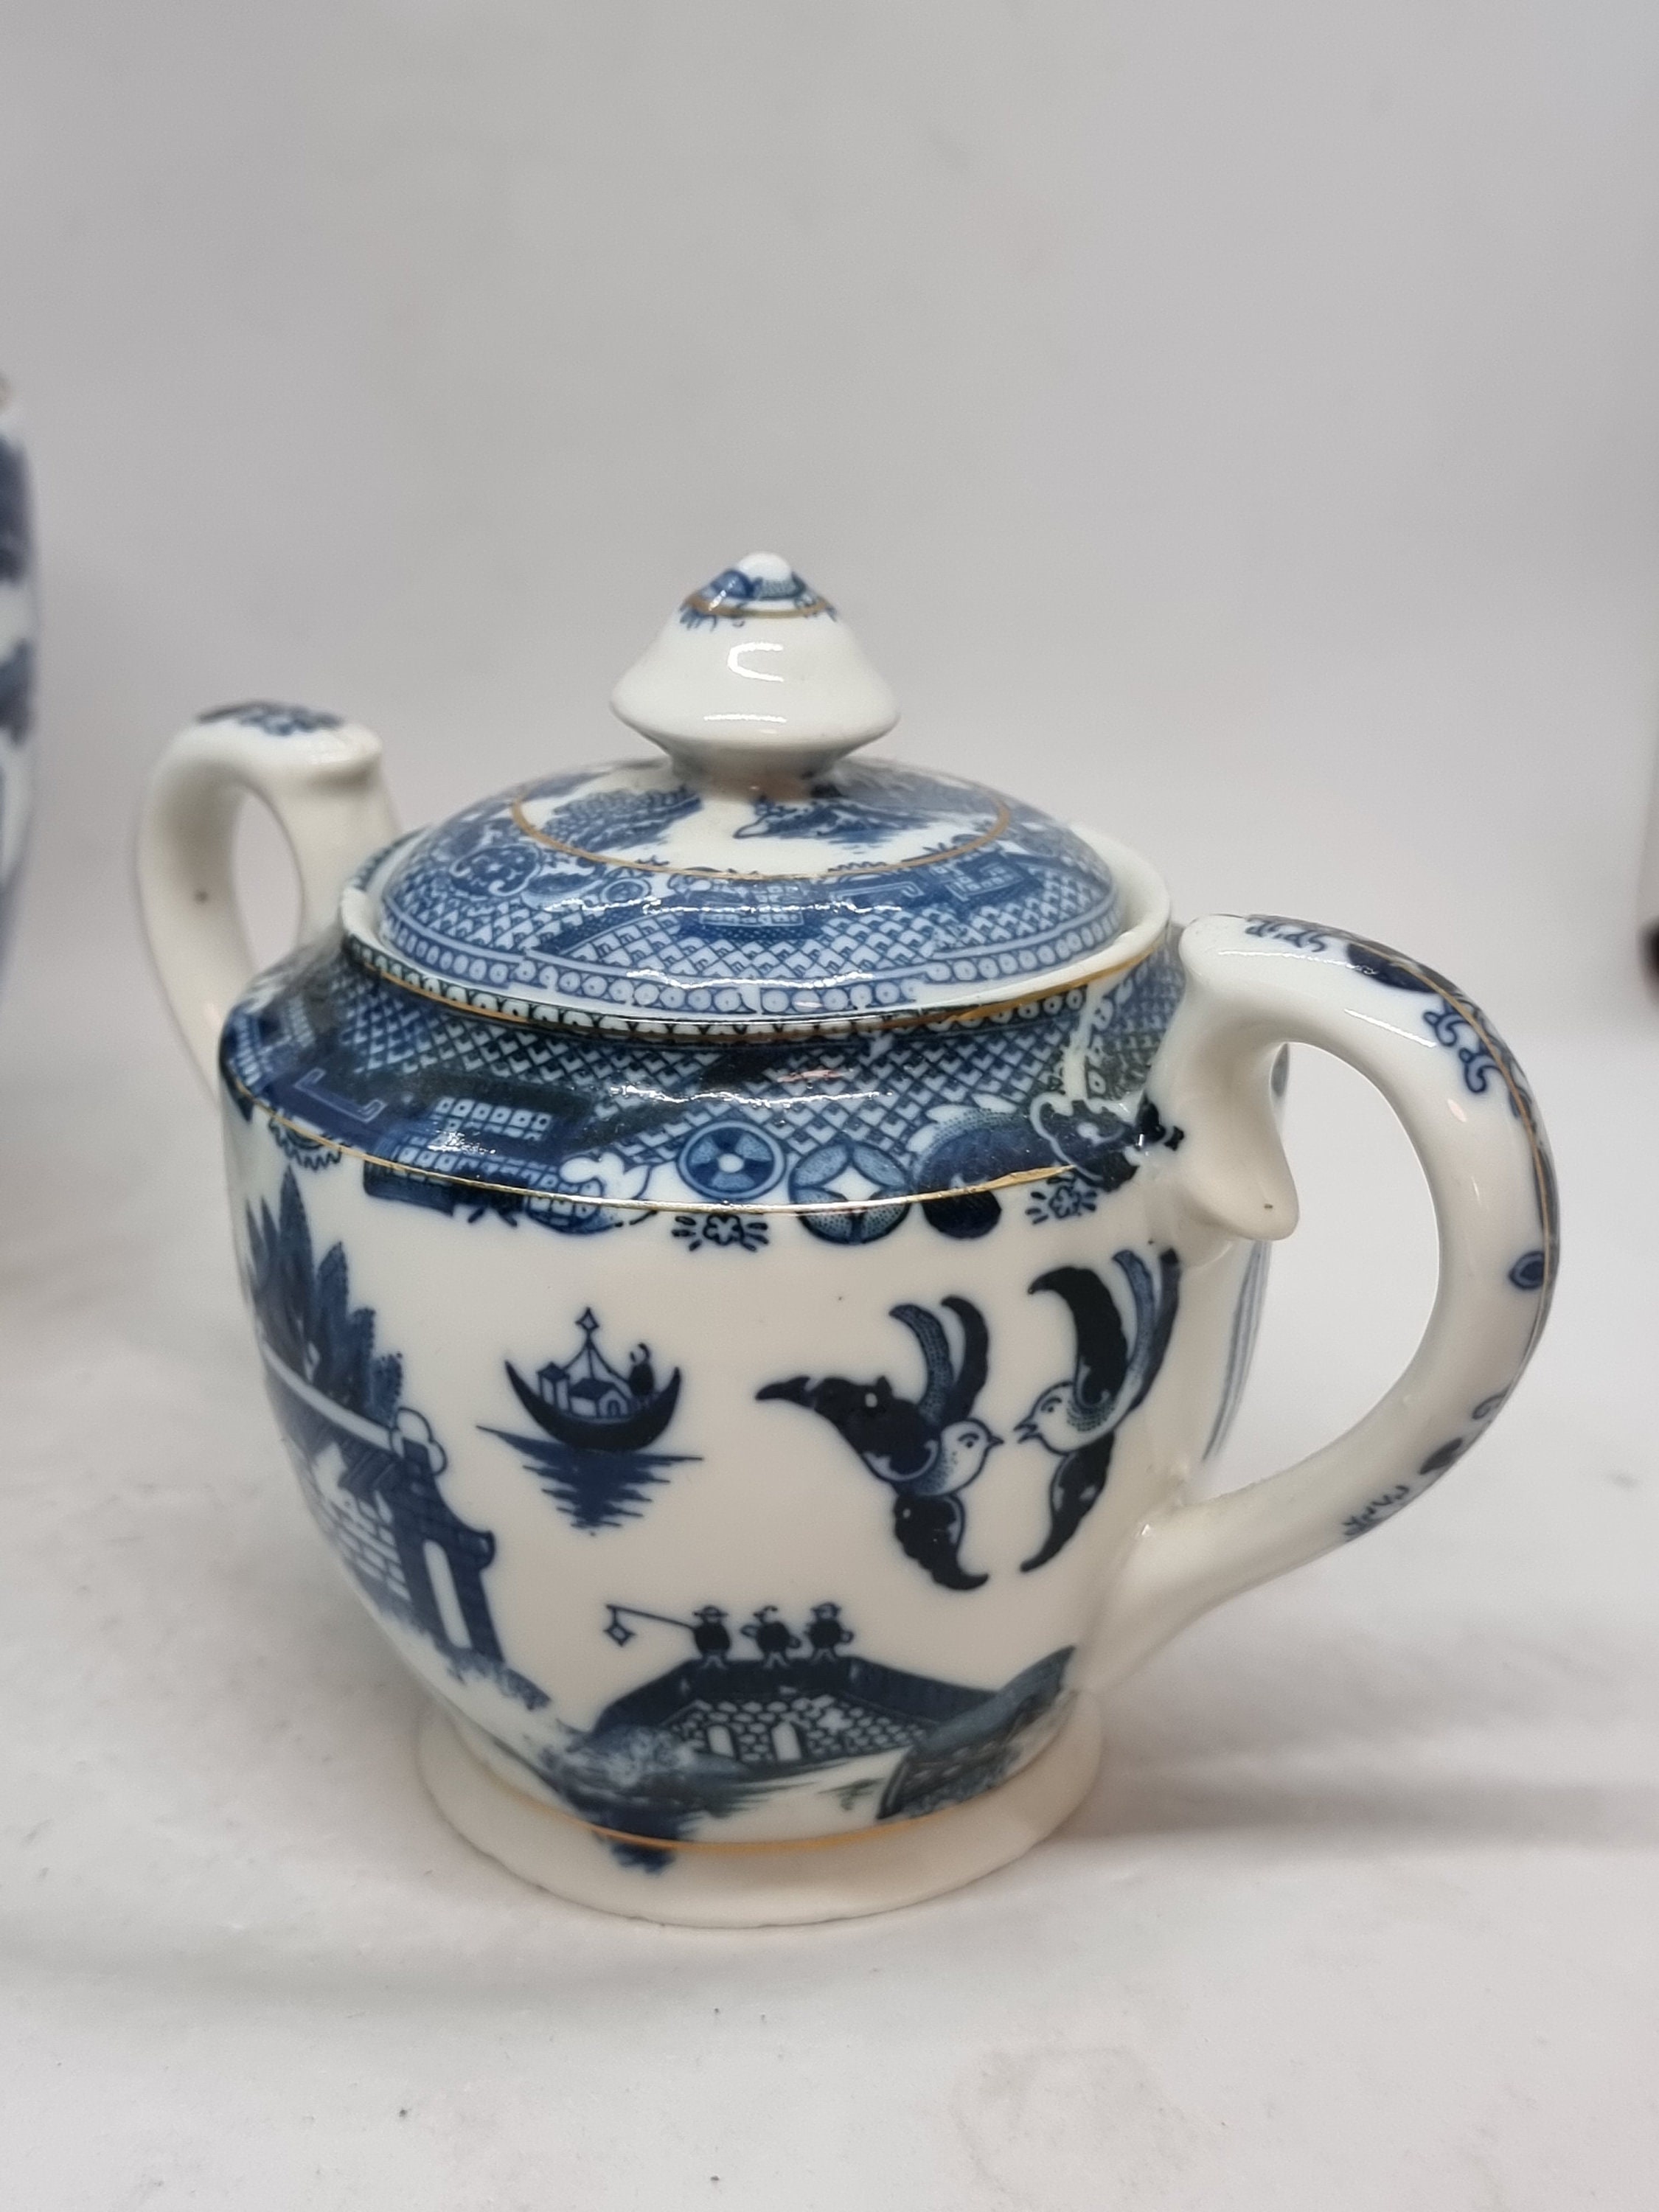 Blue Willow Dishes, Unique Teapot, Delft Blue, Calamityware :Things Could Be Worse Porcelain Chinaware, Antique Art Mugs, Teapot+Sugar & Creamer+4